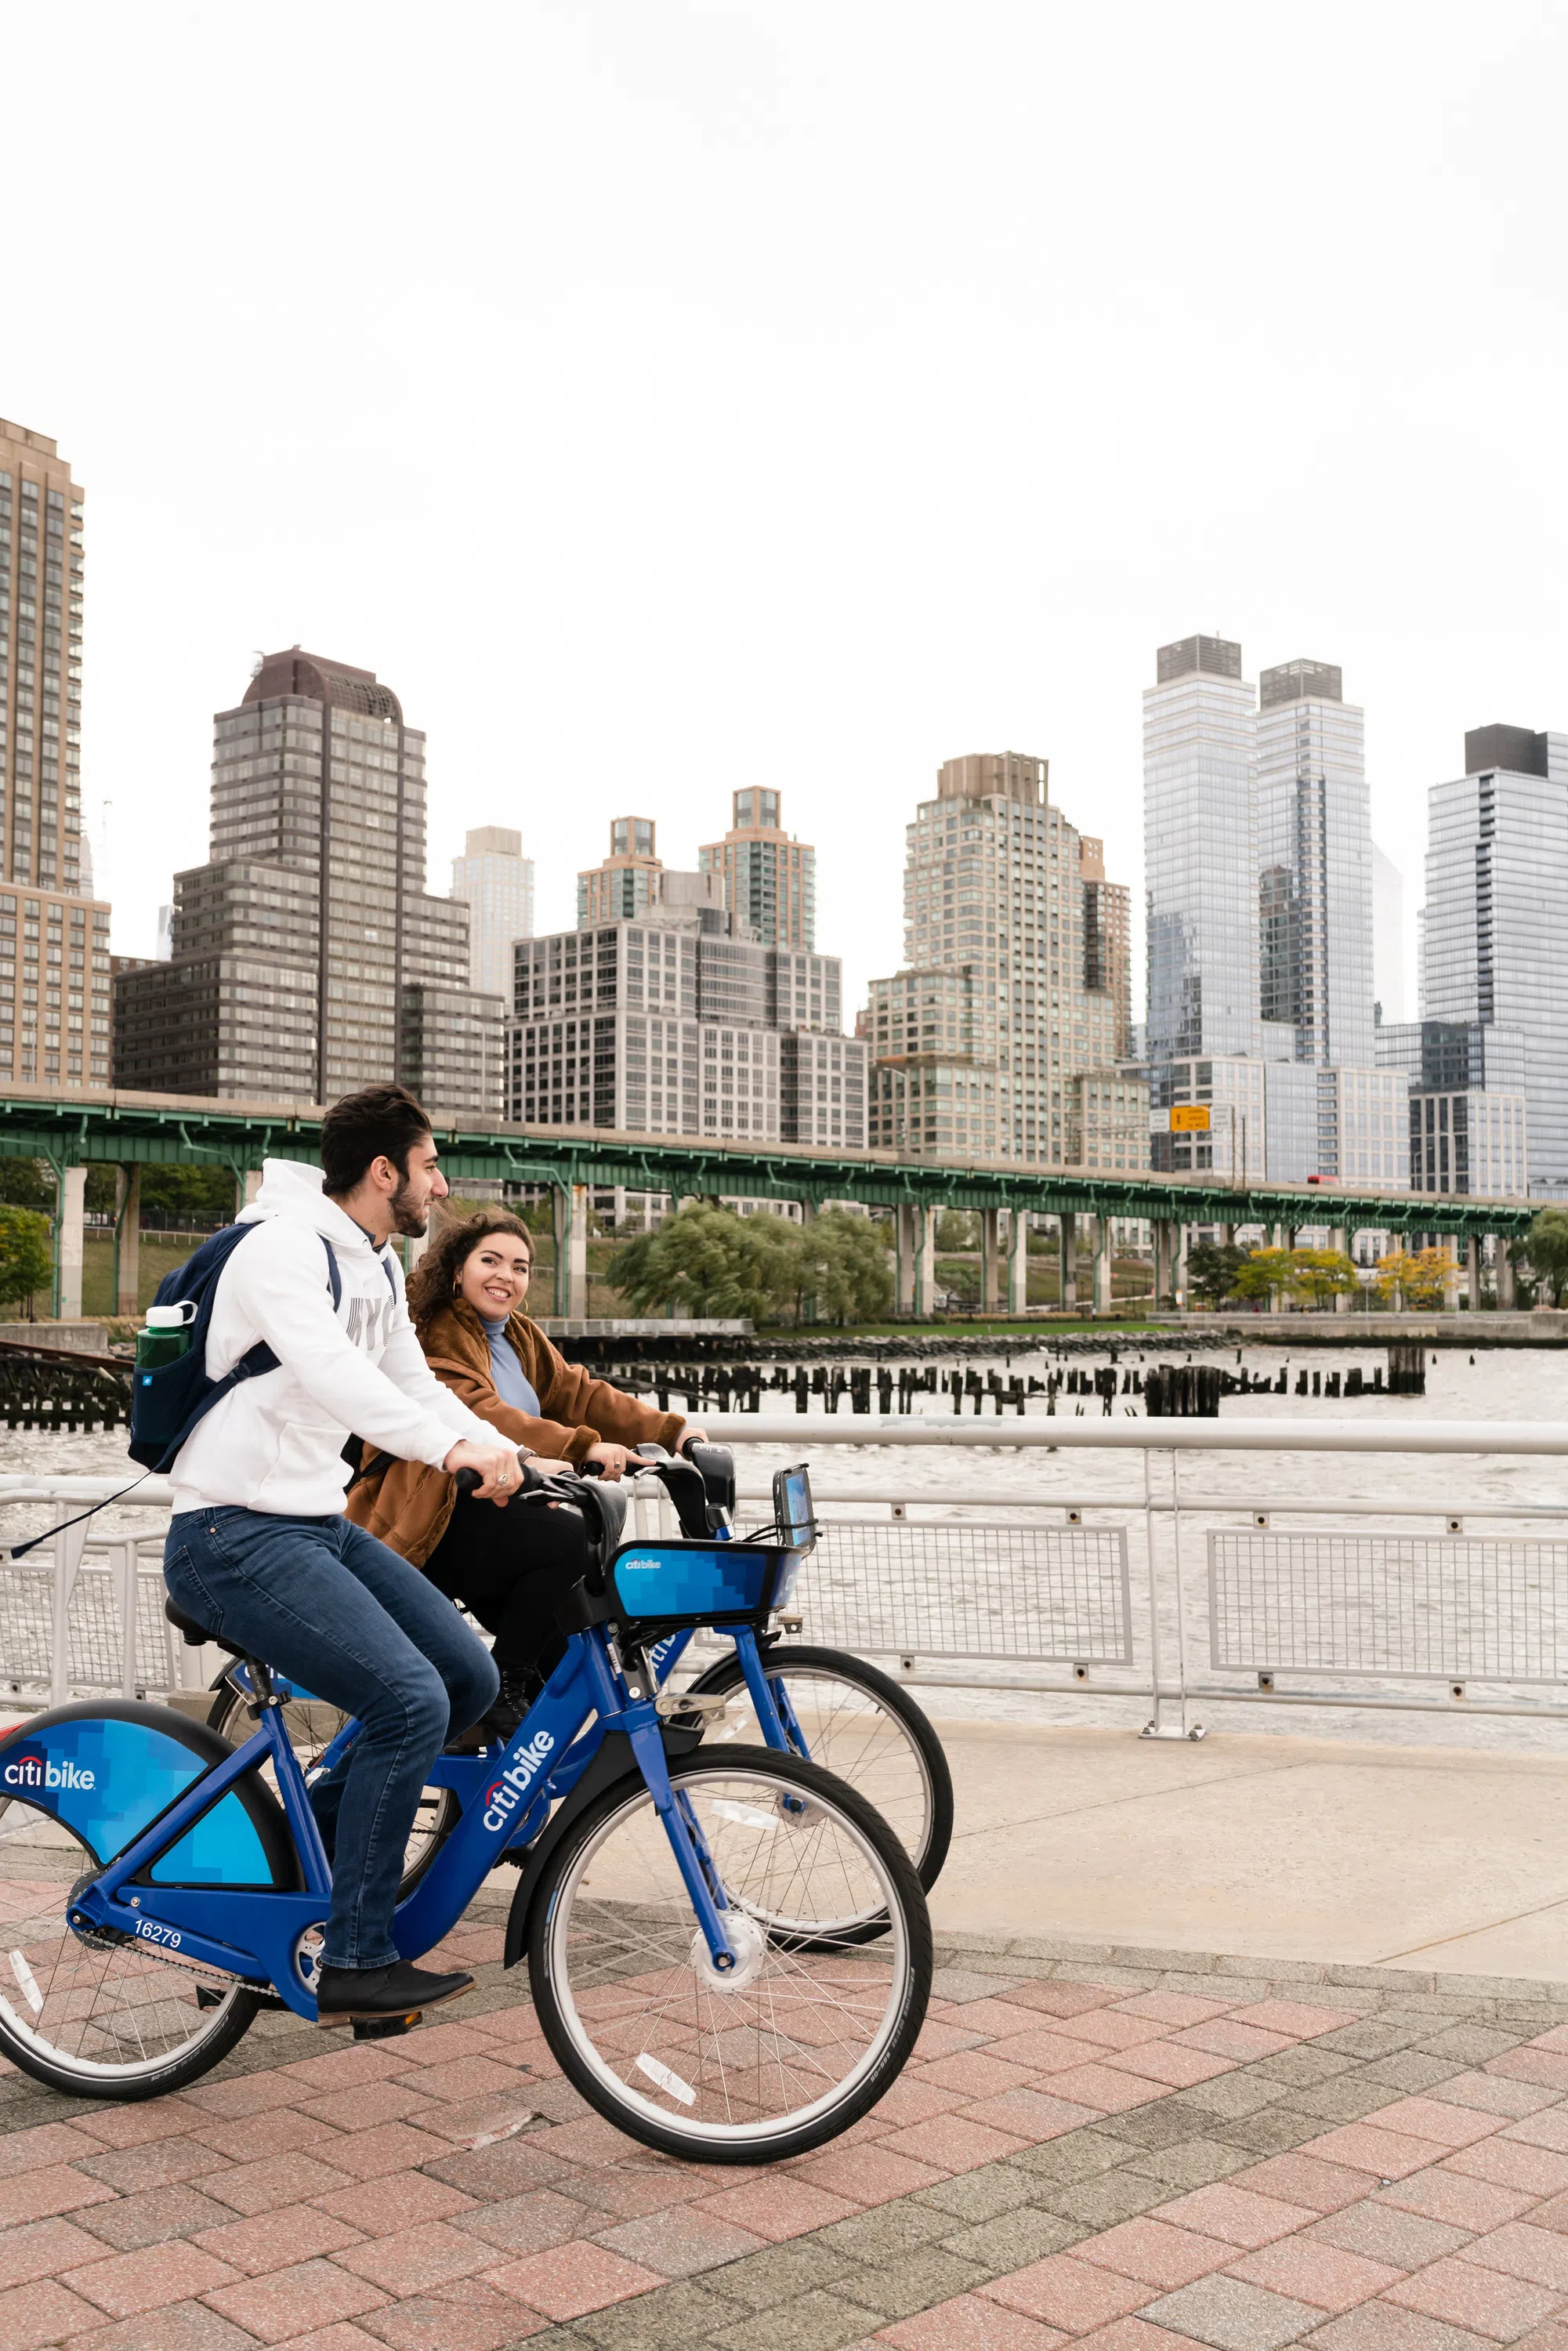 Two students ride bicycles down a park path. In the background is a body of water, a bridge, and a view of NYC skyscrapers.